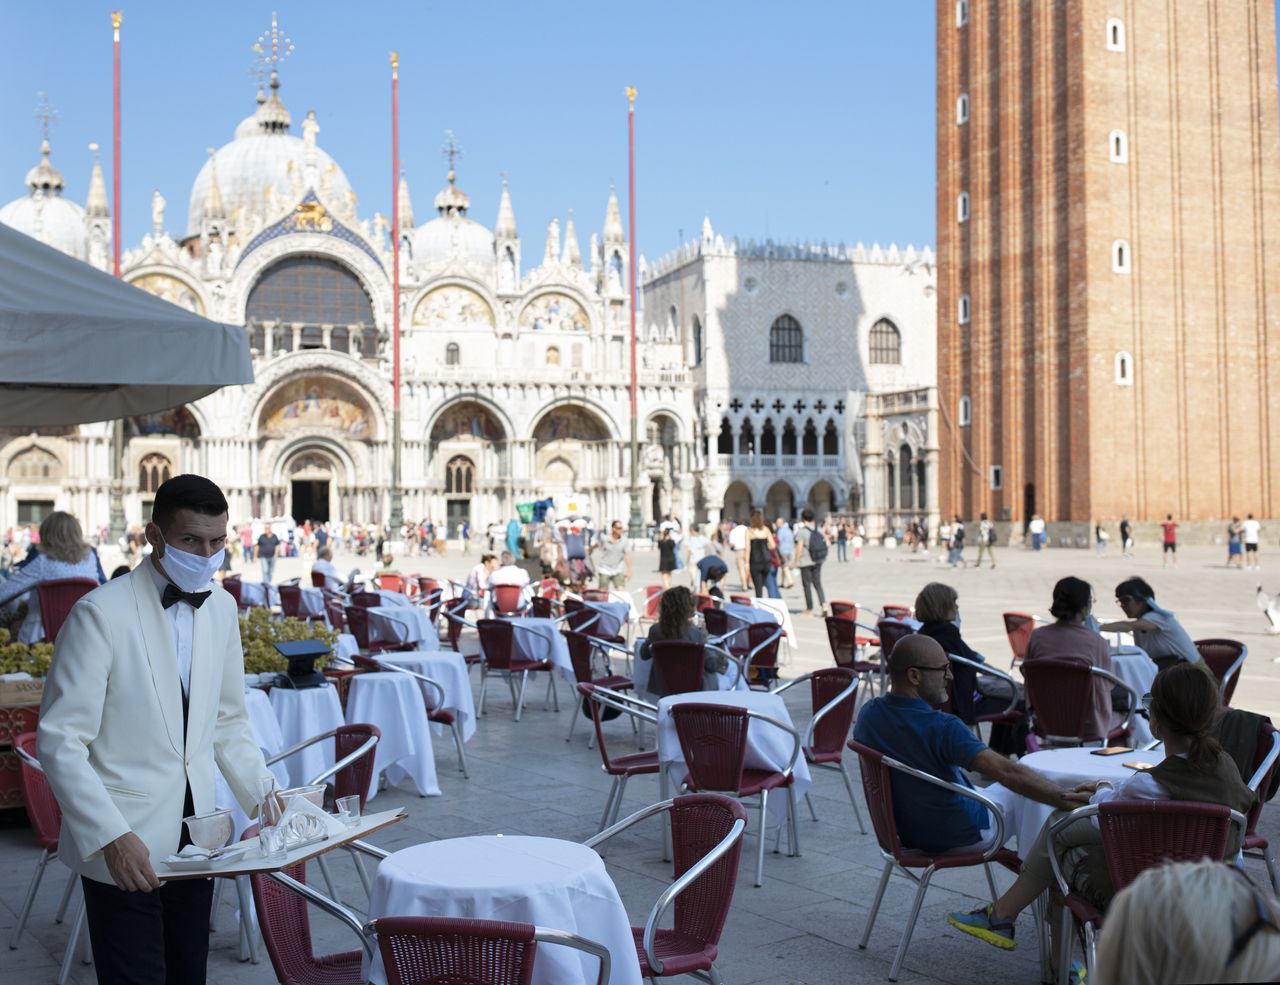 Waiters wearing protective face masks work on the patio facing the Piazza San Marco in Venice, Italy, on June 13.